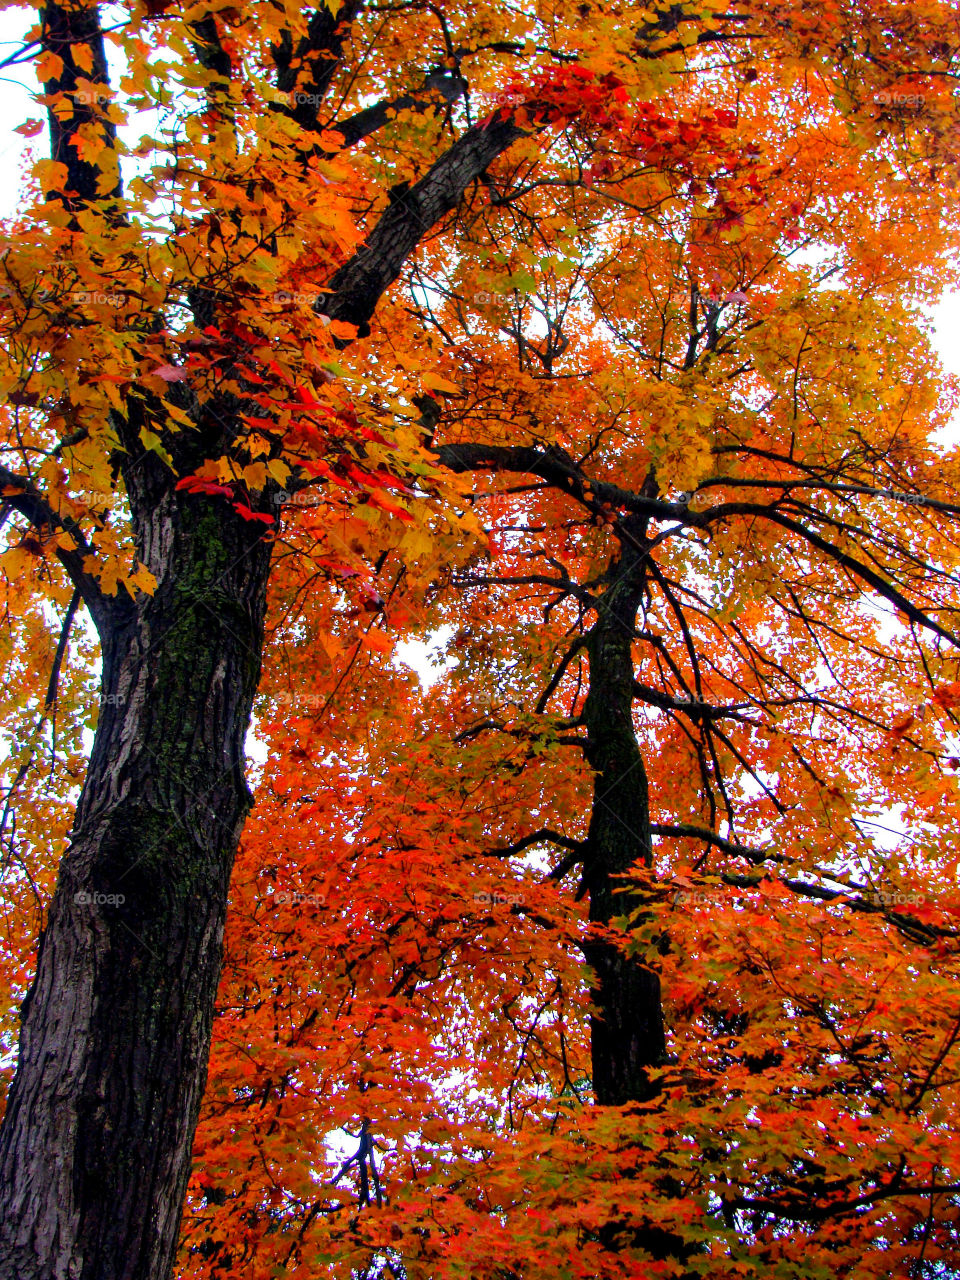 Tall trees burst with bright orange leaves in a Vermont wood.